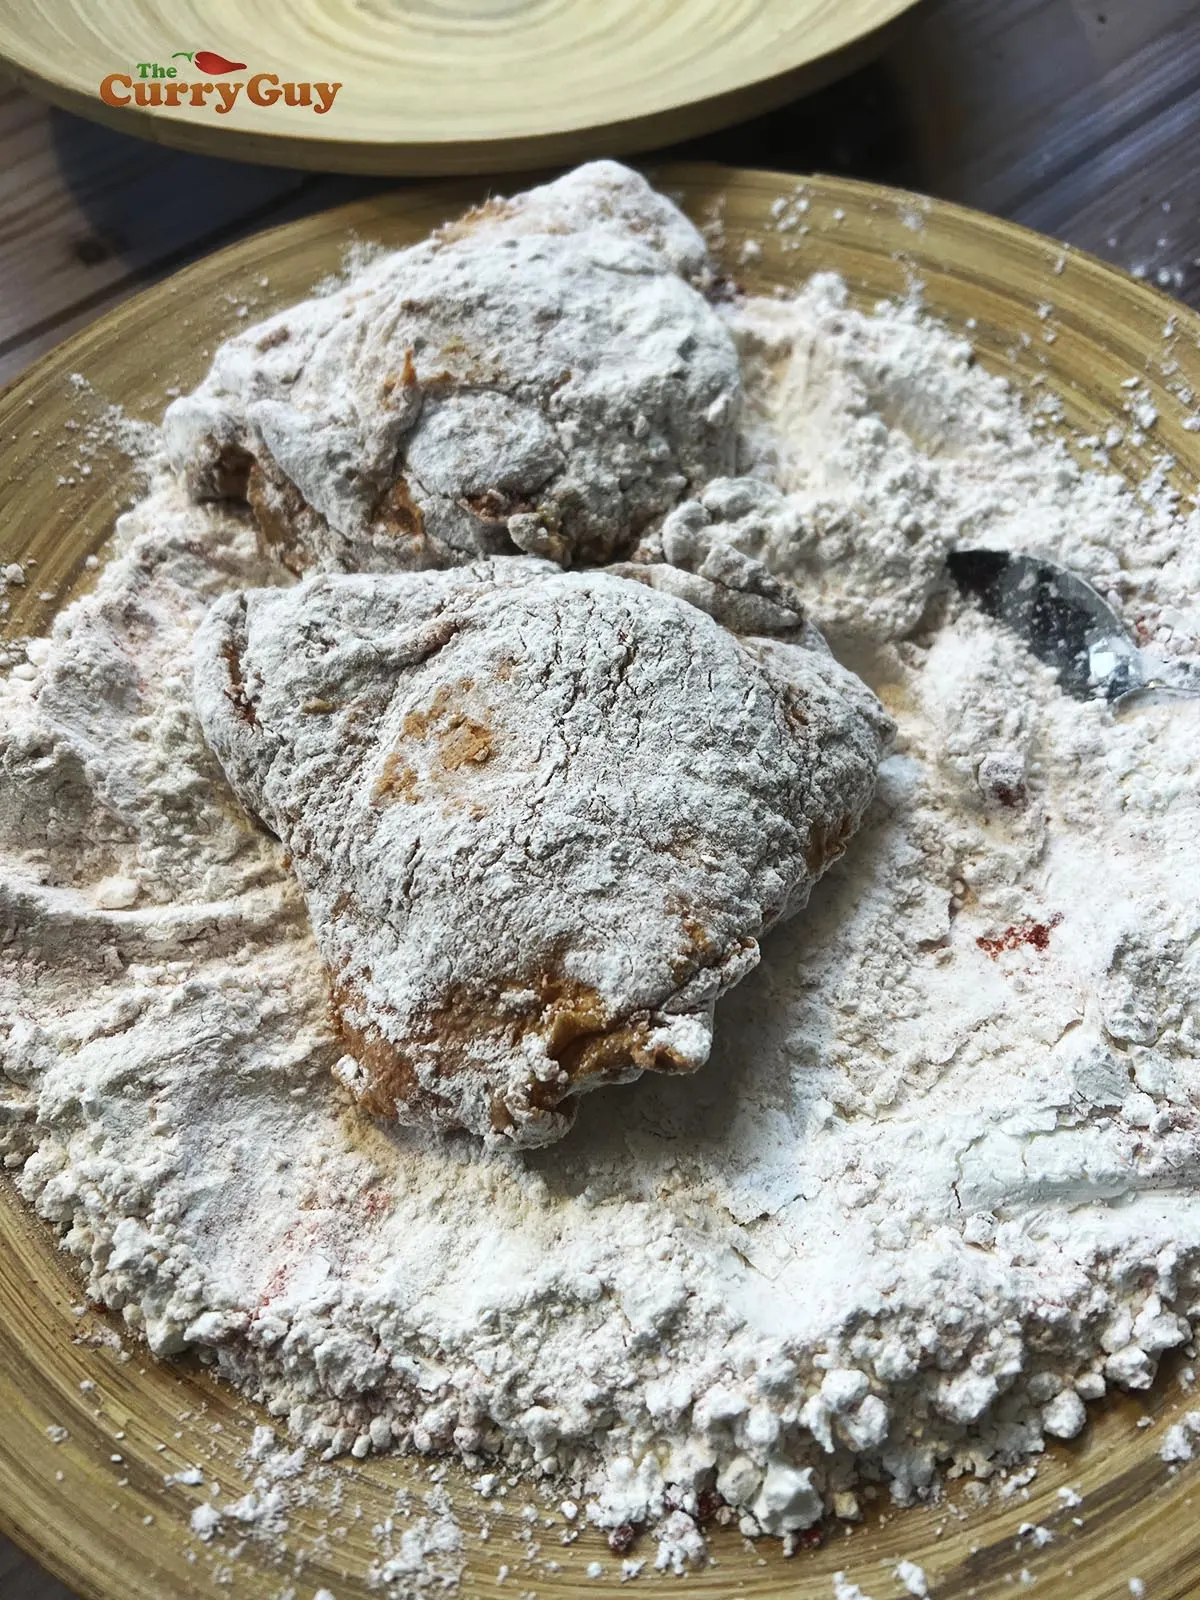 Chicken coated in flour, ready for frying.